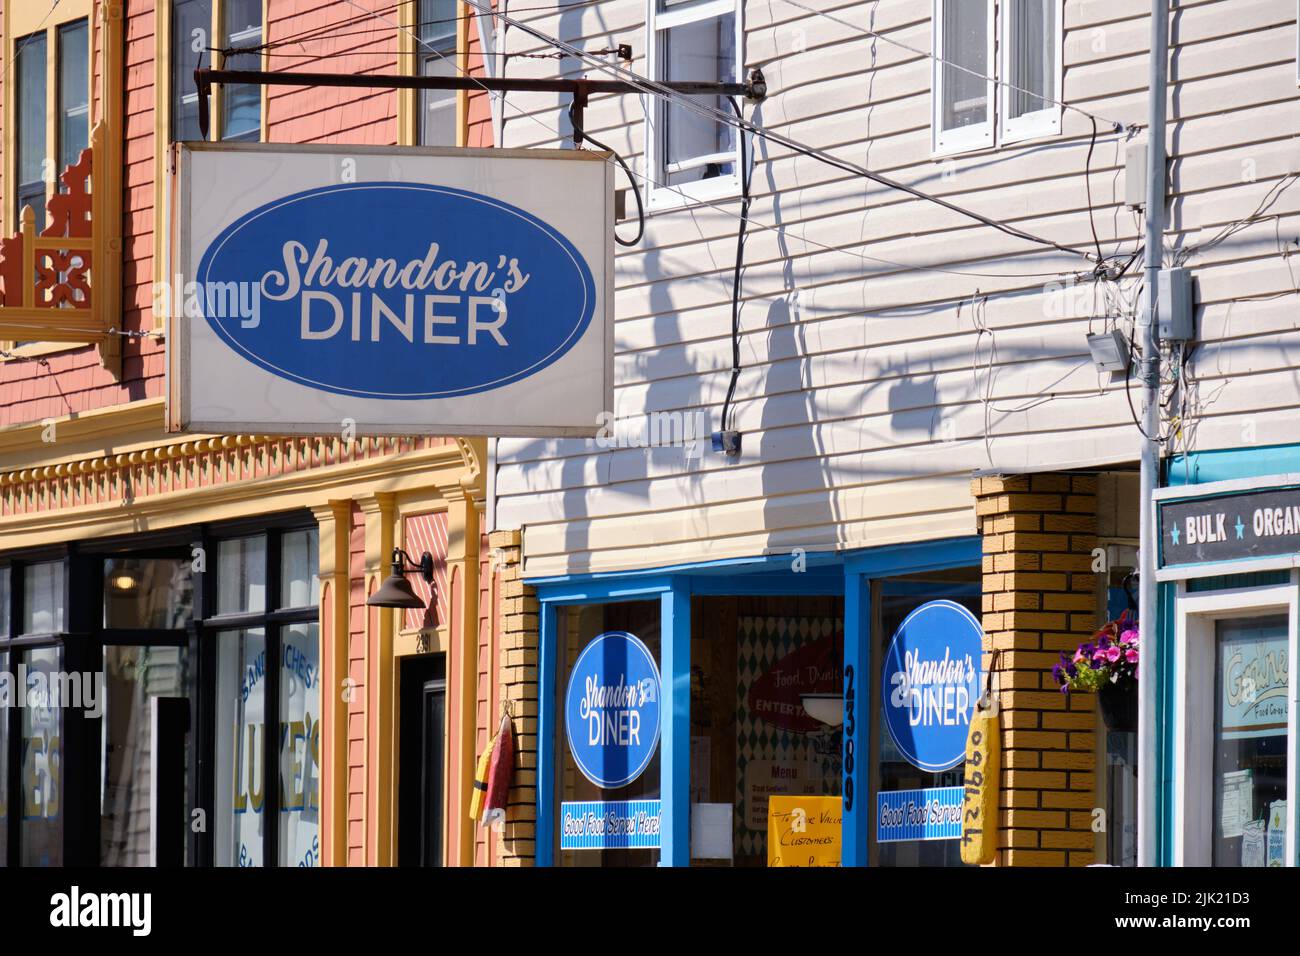 Sign of Shandon's Diner, a fictional restaurant on location filiming of TV show Sullivan's Crossing in Nova Scotia Stock Photo